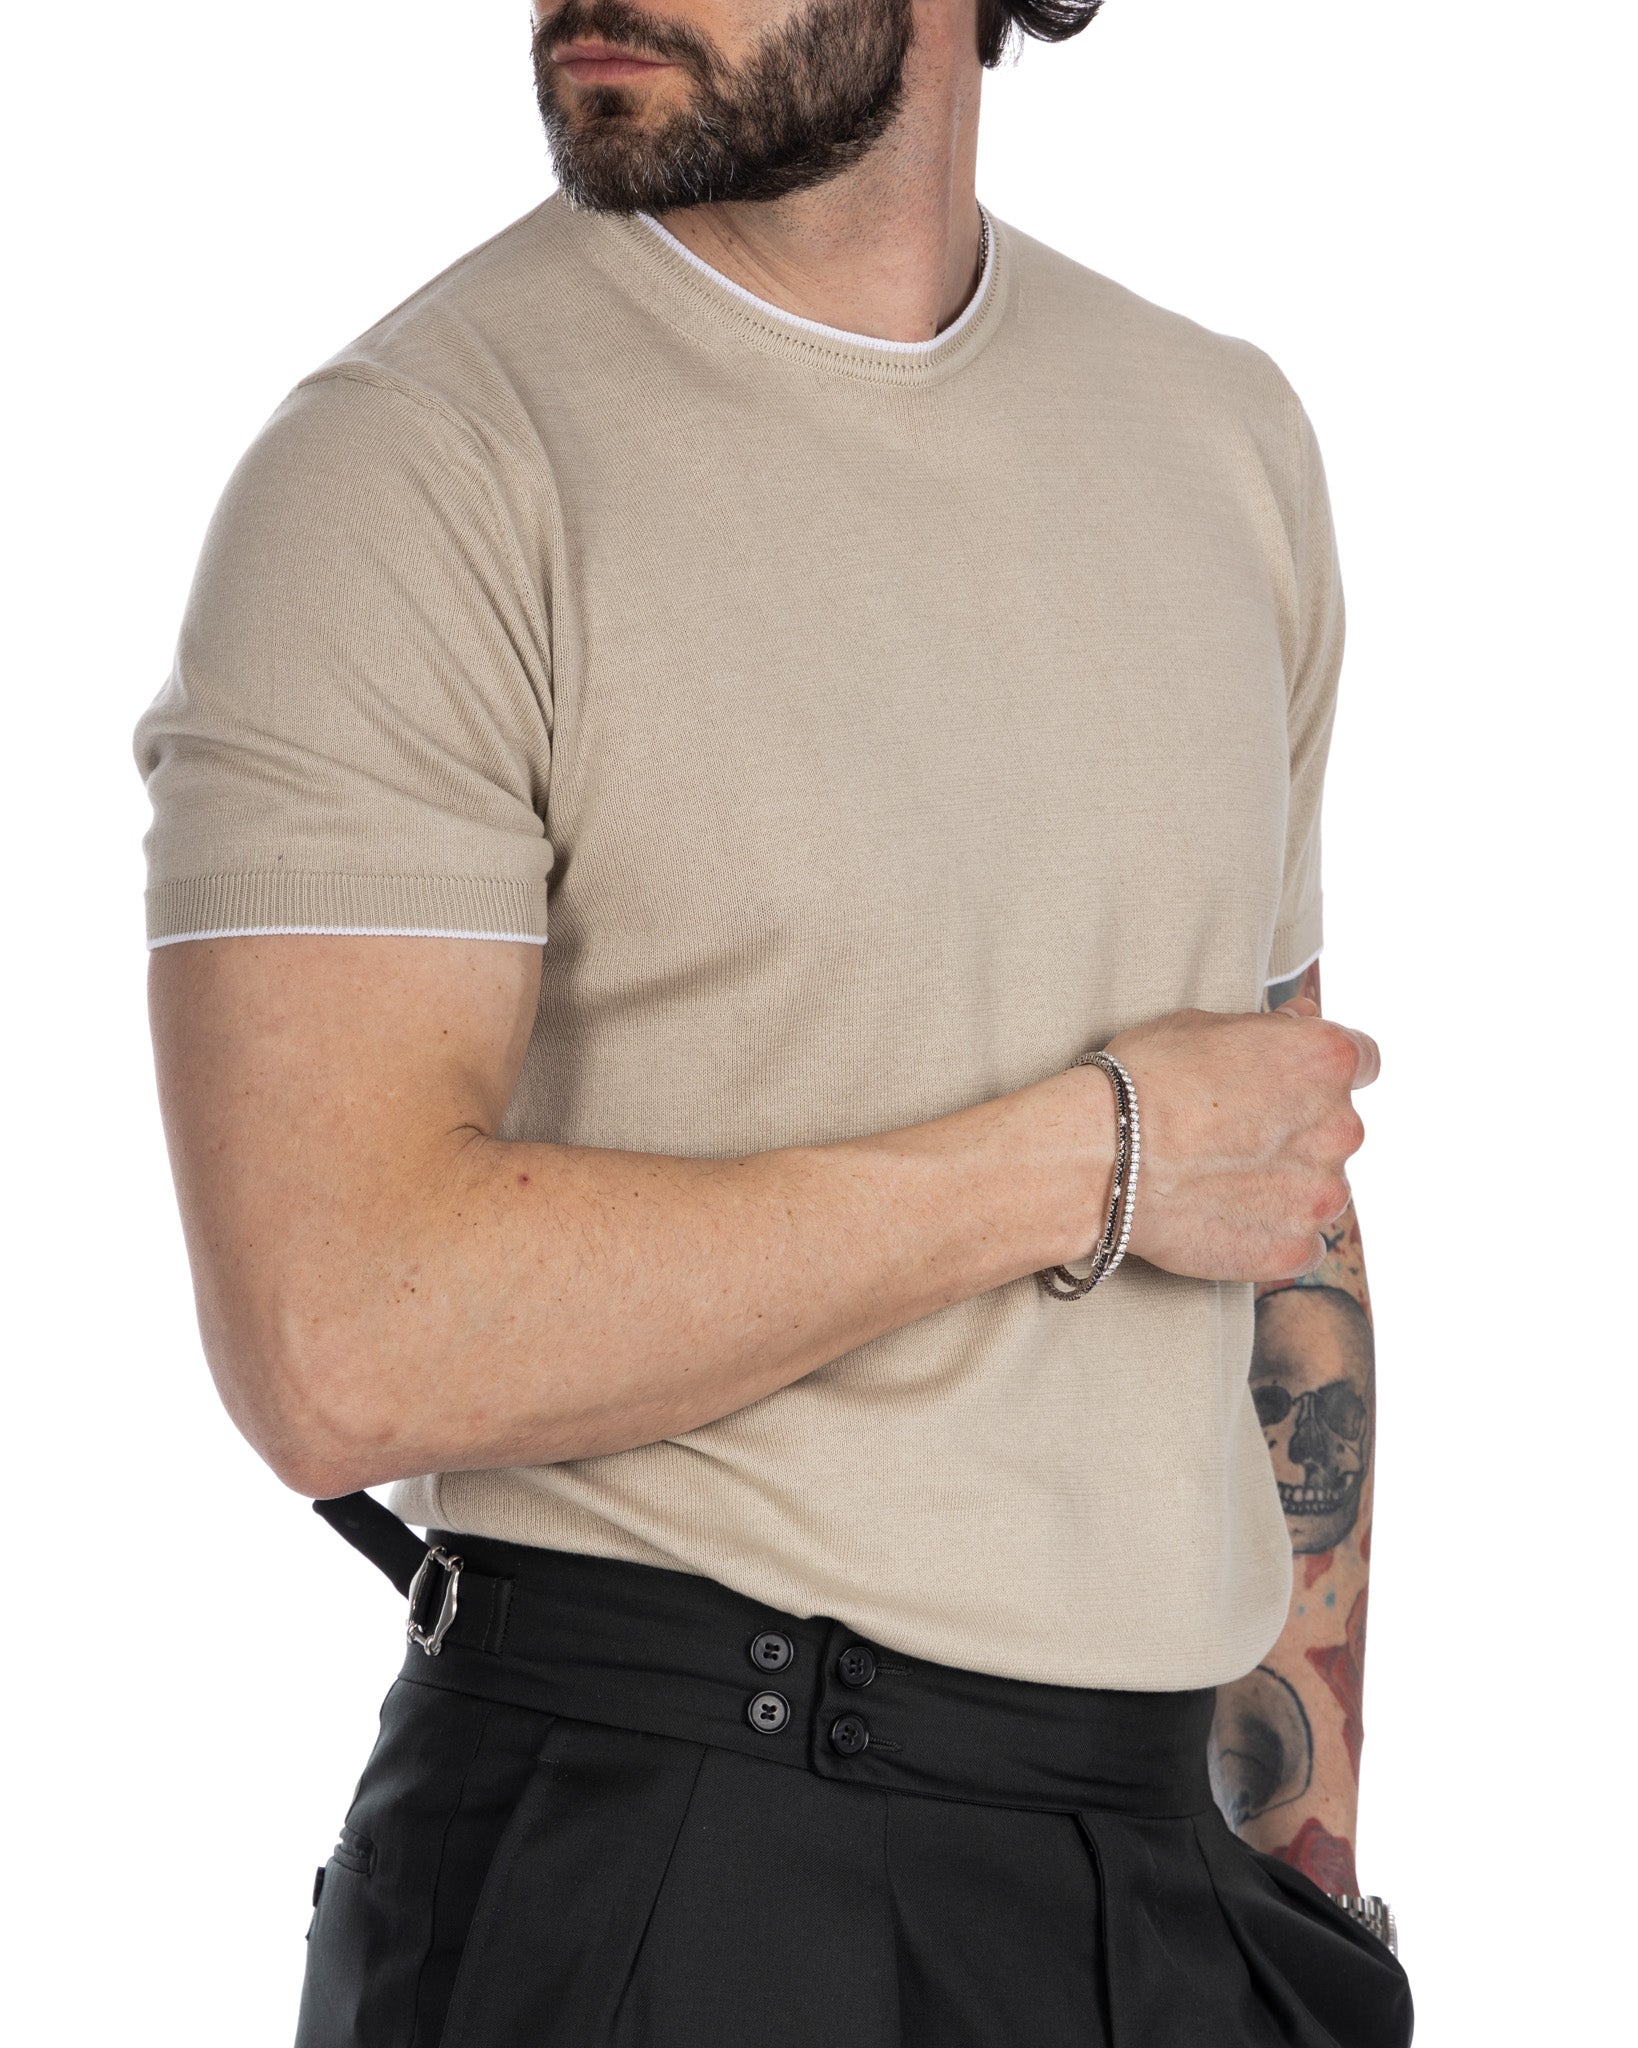 Holger - beige knitted t-shirt with contrast